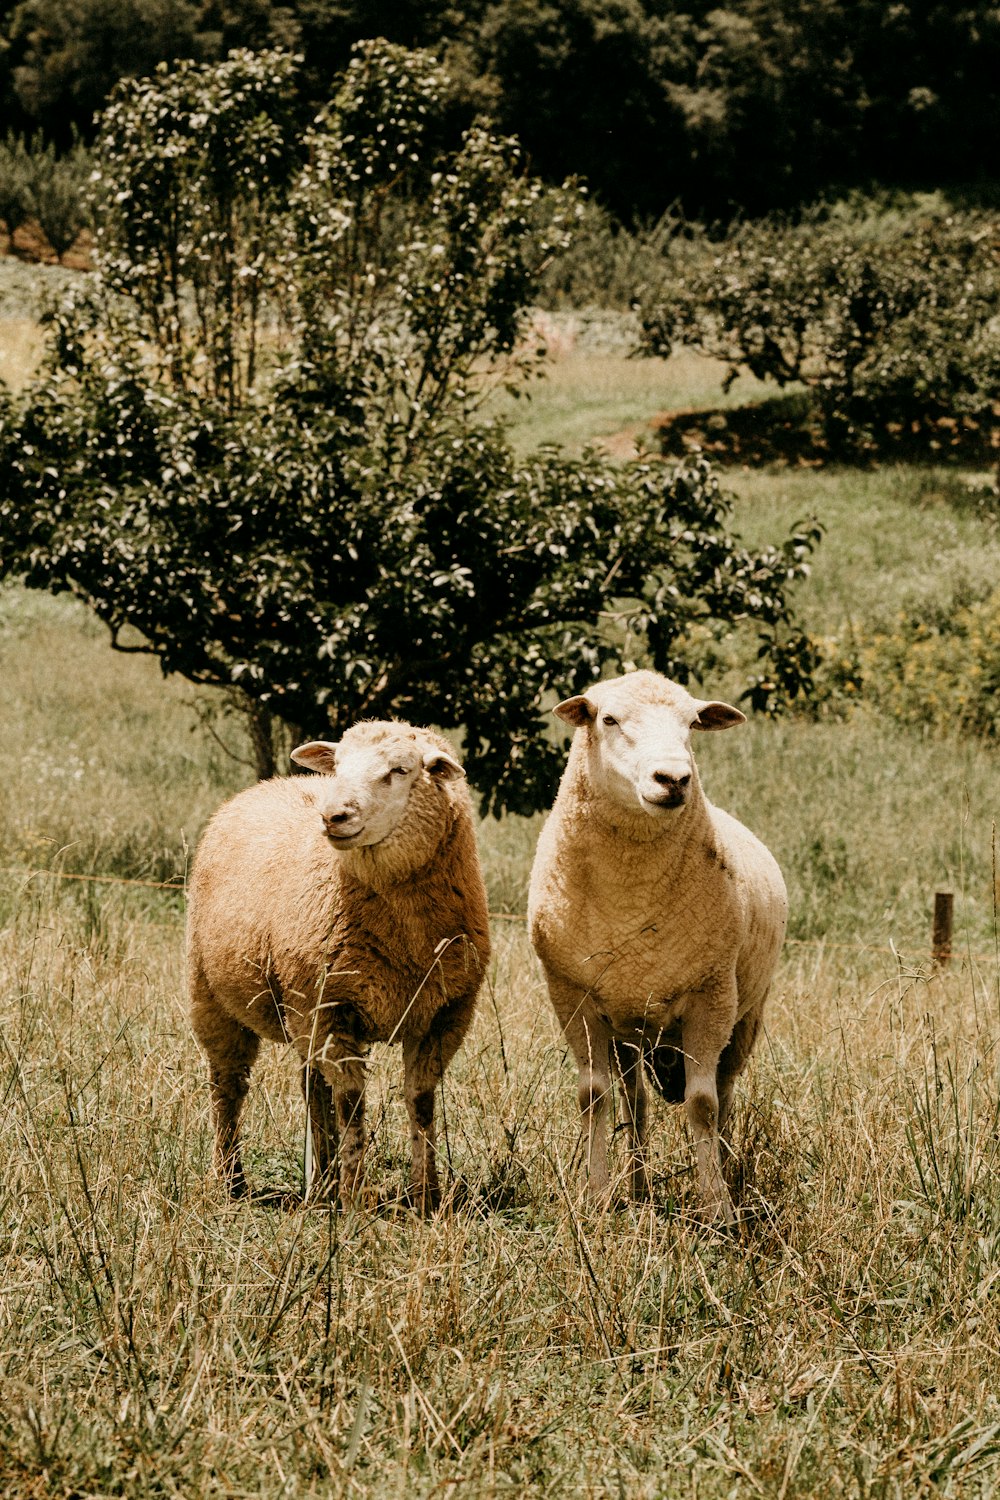 three sheep on grass field during daytime